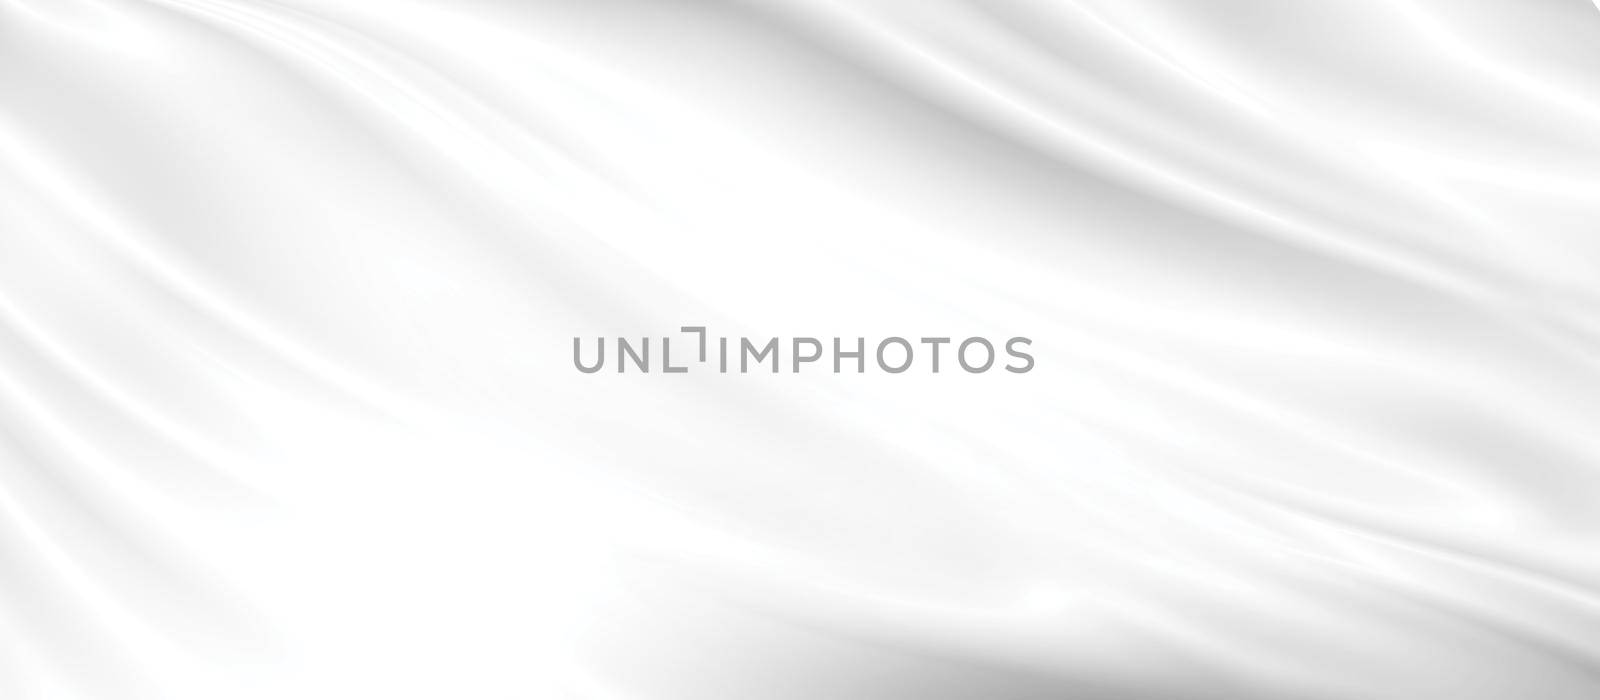 Abstract white fabric background with copy space illustration by Myimagine